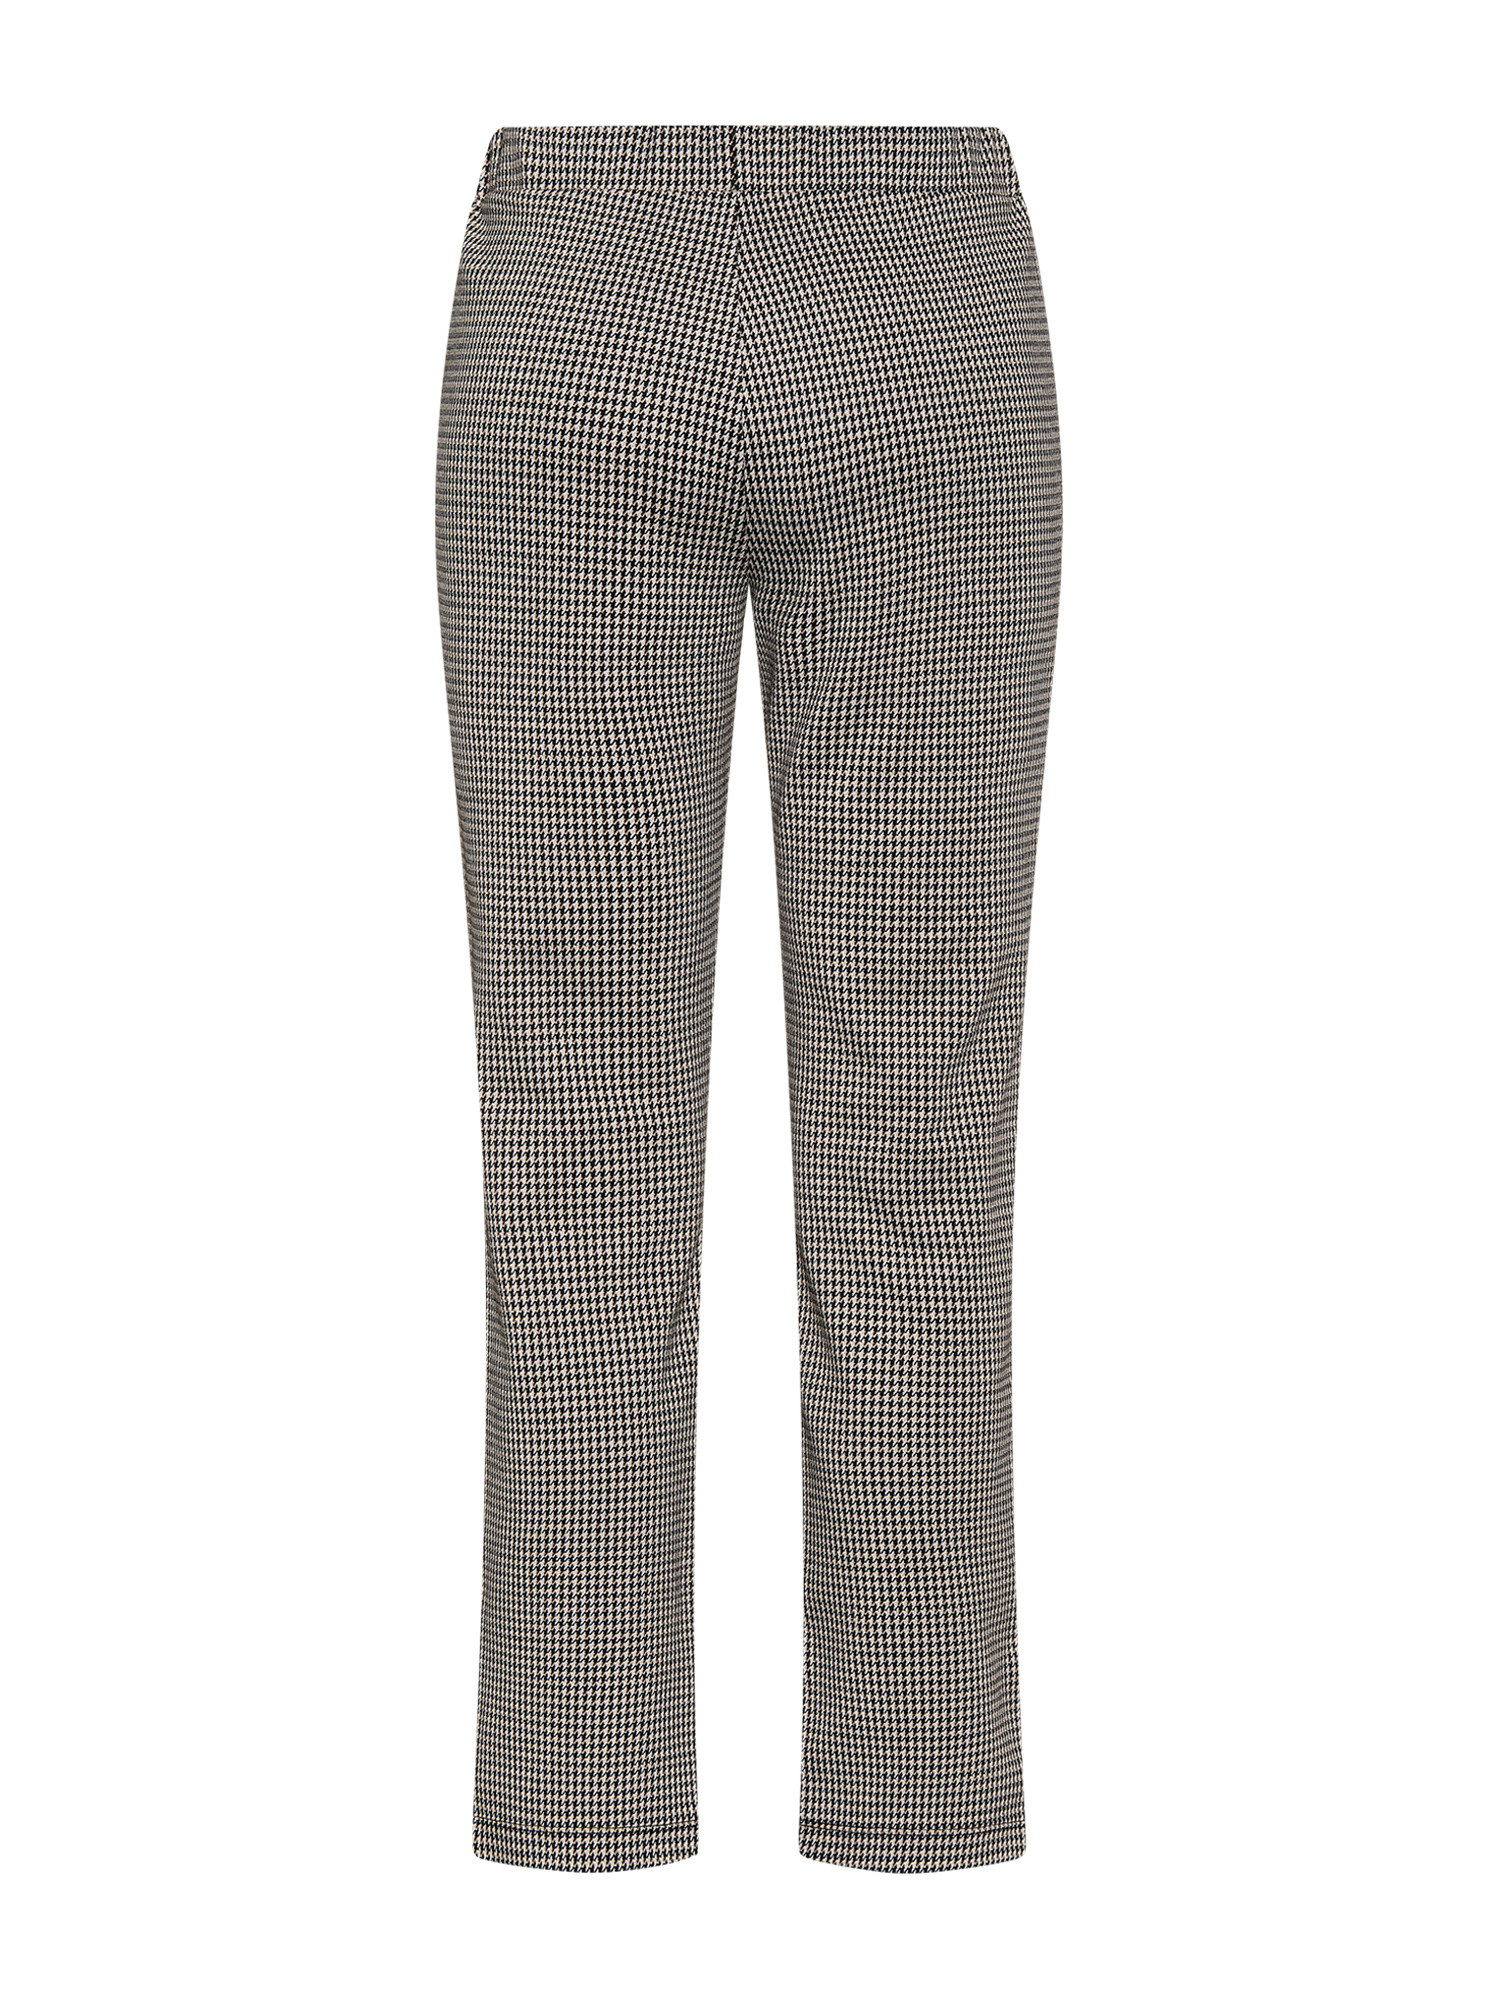 Koan - Regular fit micro houndstooth trousers, Black, large image number 1